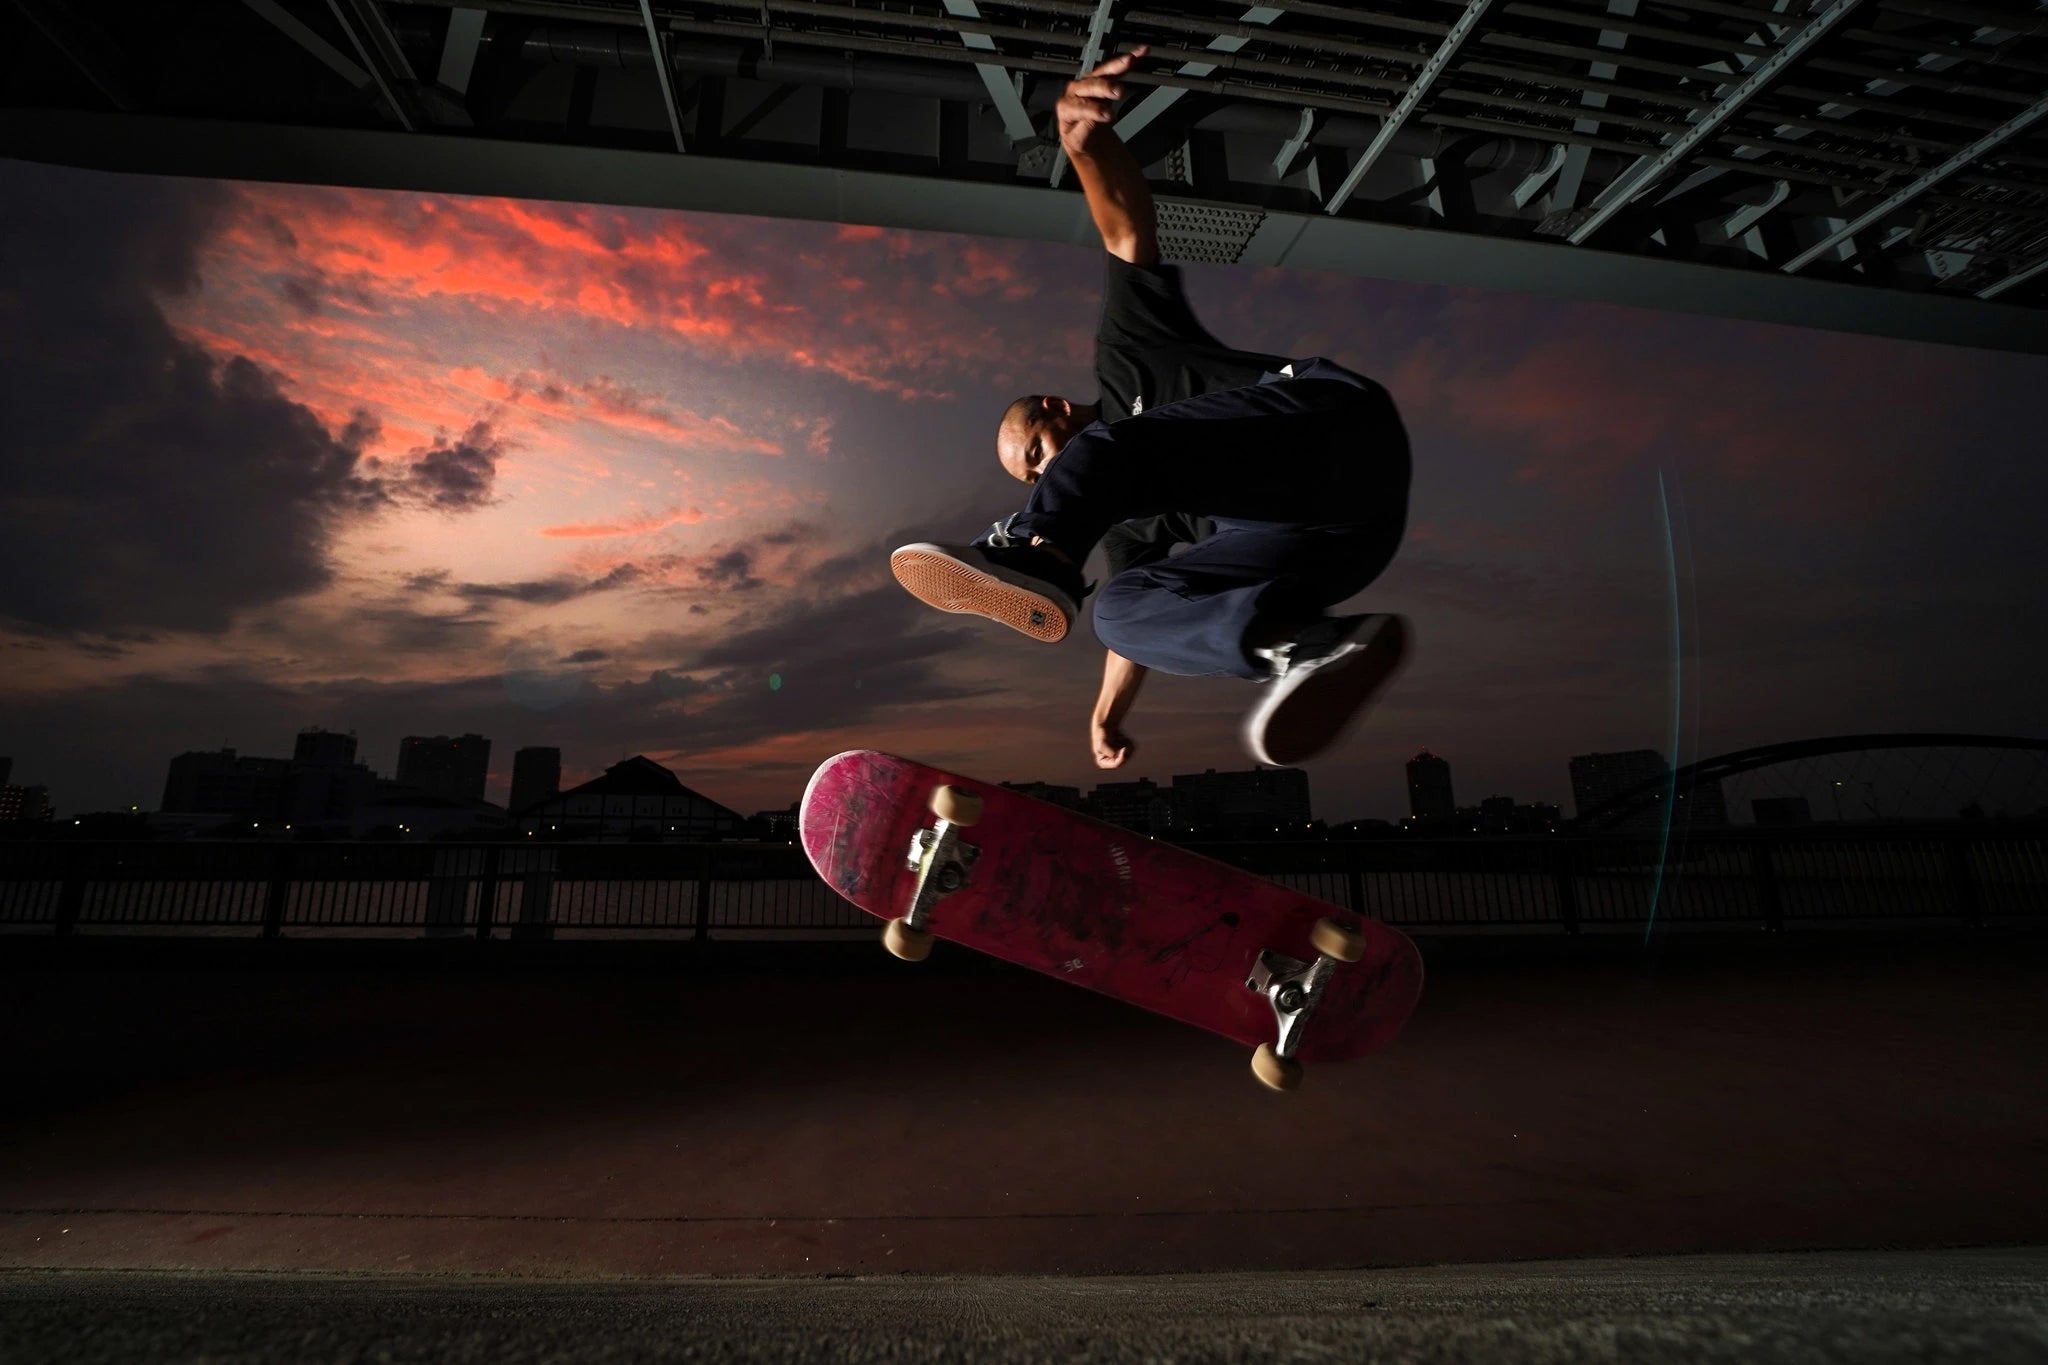 Japan’s Skateboarders Roll, Warily, Out of the Shadows